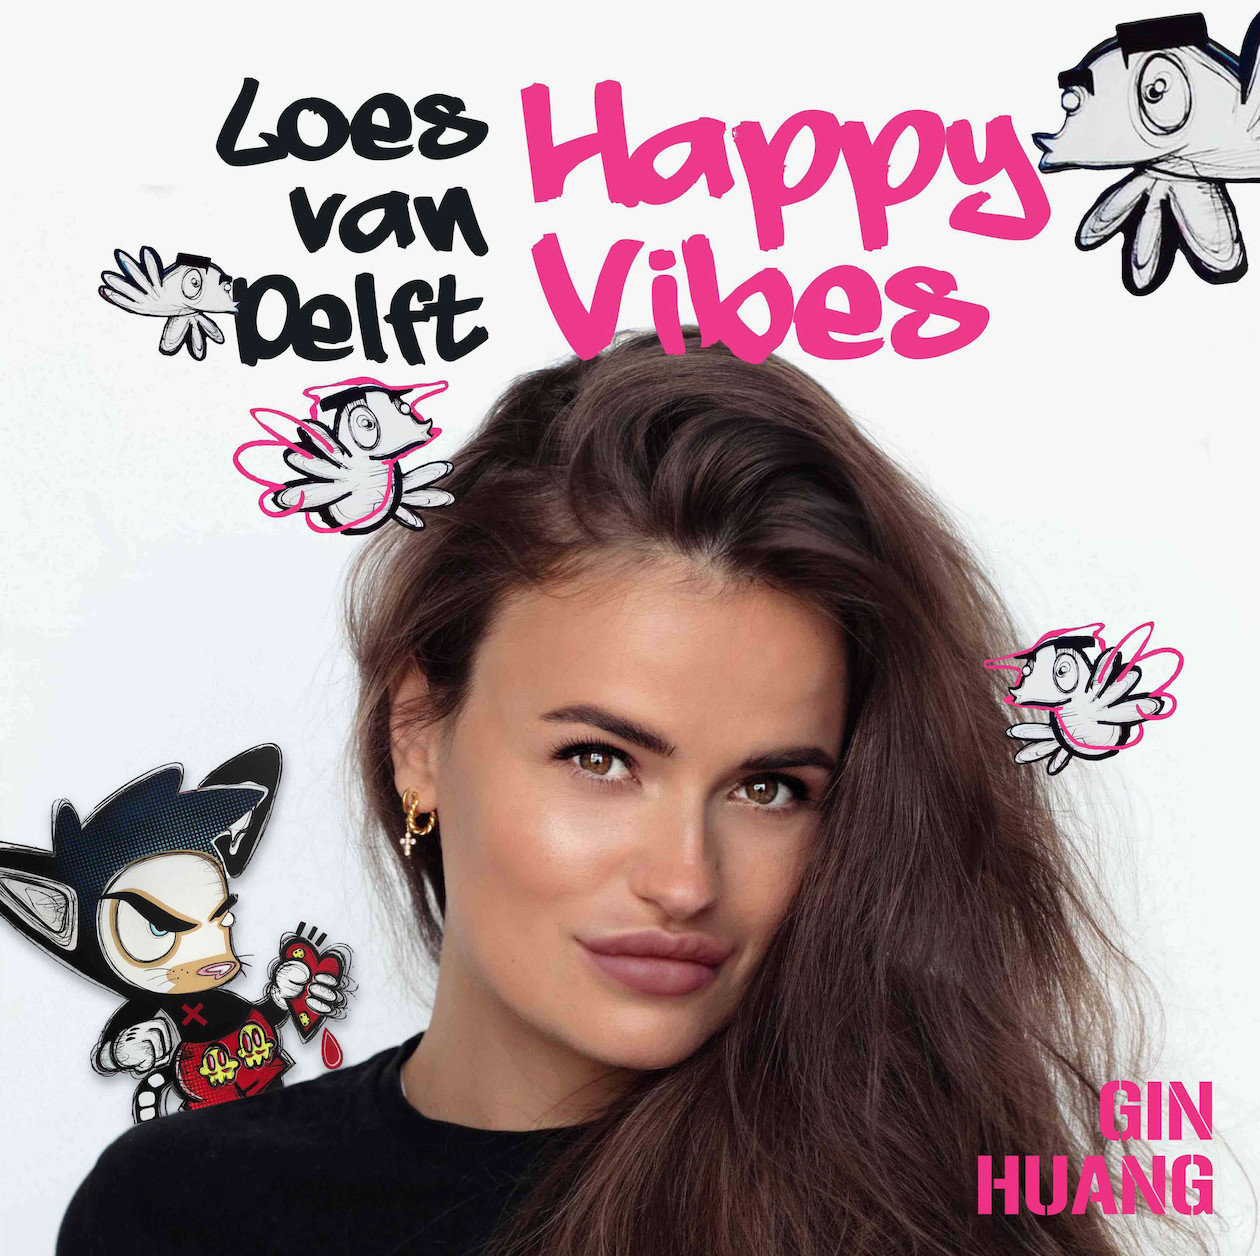 News｜“ Happy Vibes “  Loes van Delft  Asia Premiere - Taichung